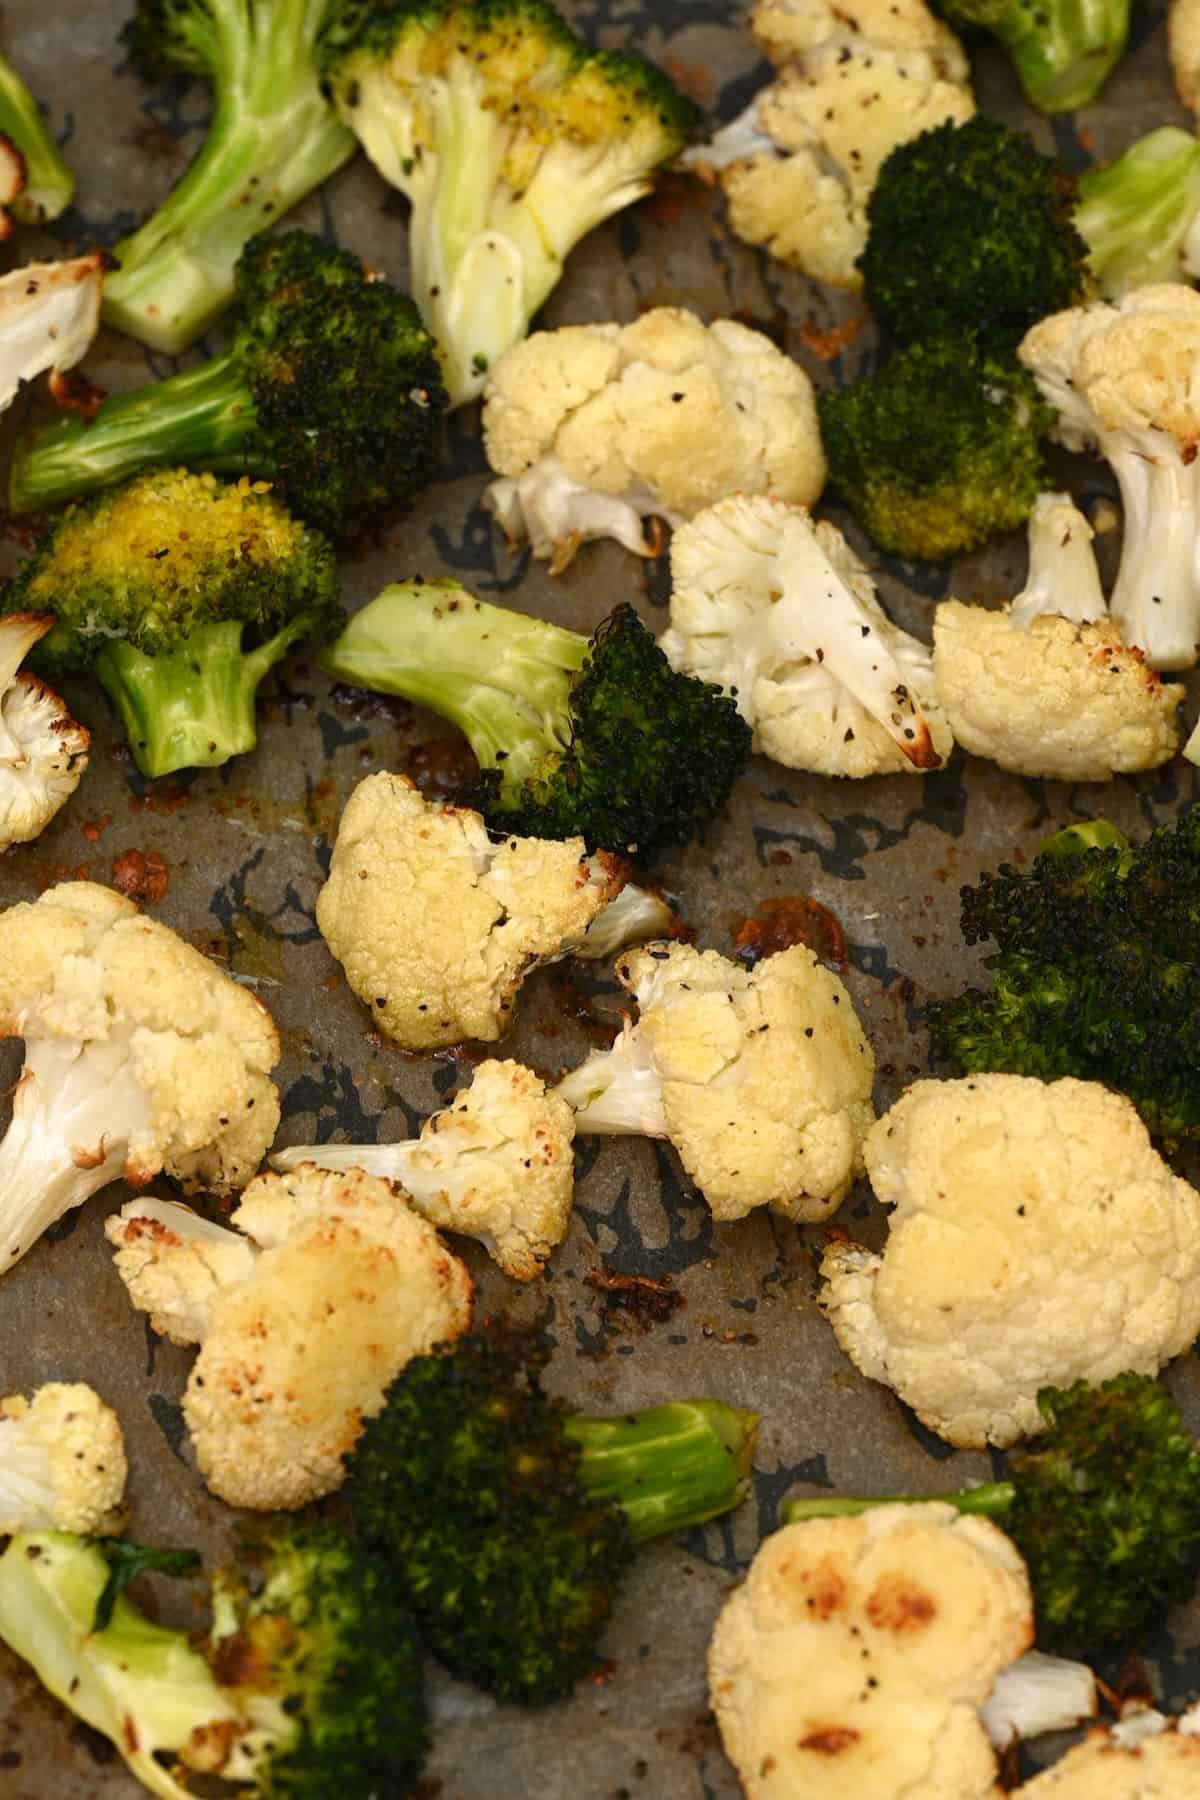 A tray with roasted cauliflower and broccoli